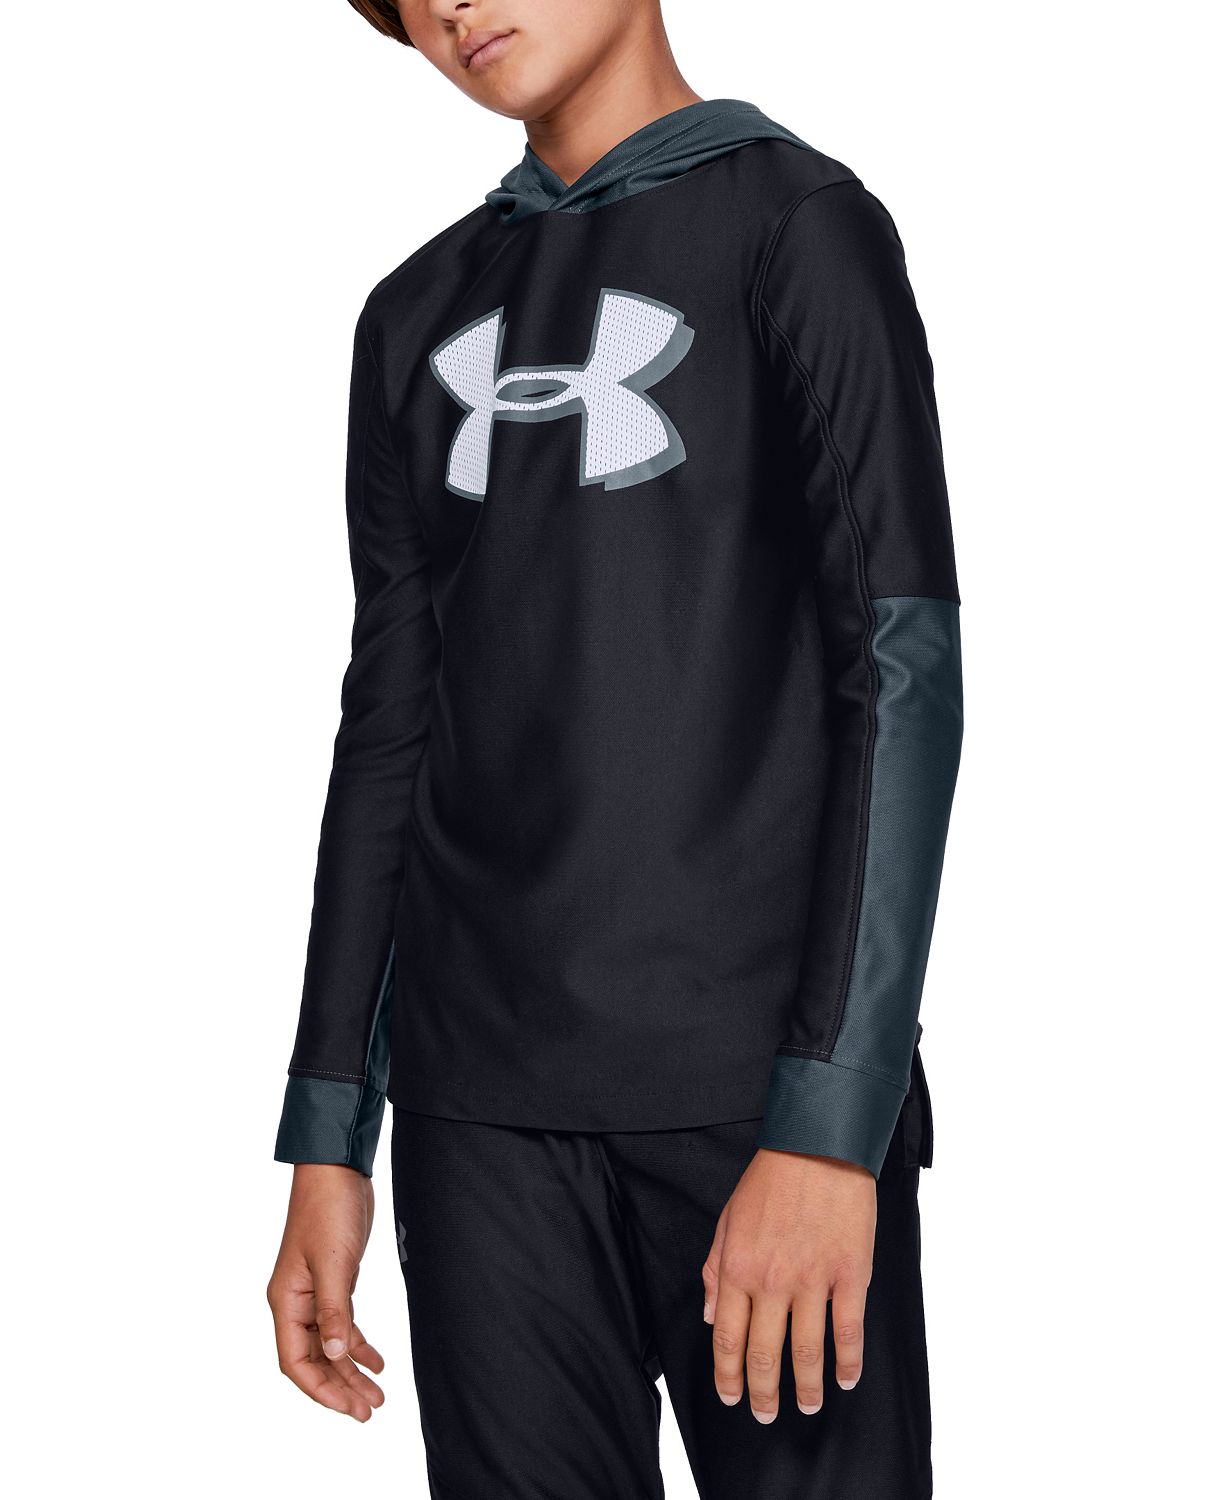 *HOT!* Macy’s – Under Armour Boys Apparel on Clearance (LAST ACT) + FREE Shipping with $25 ...